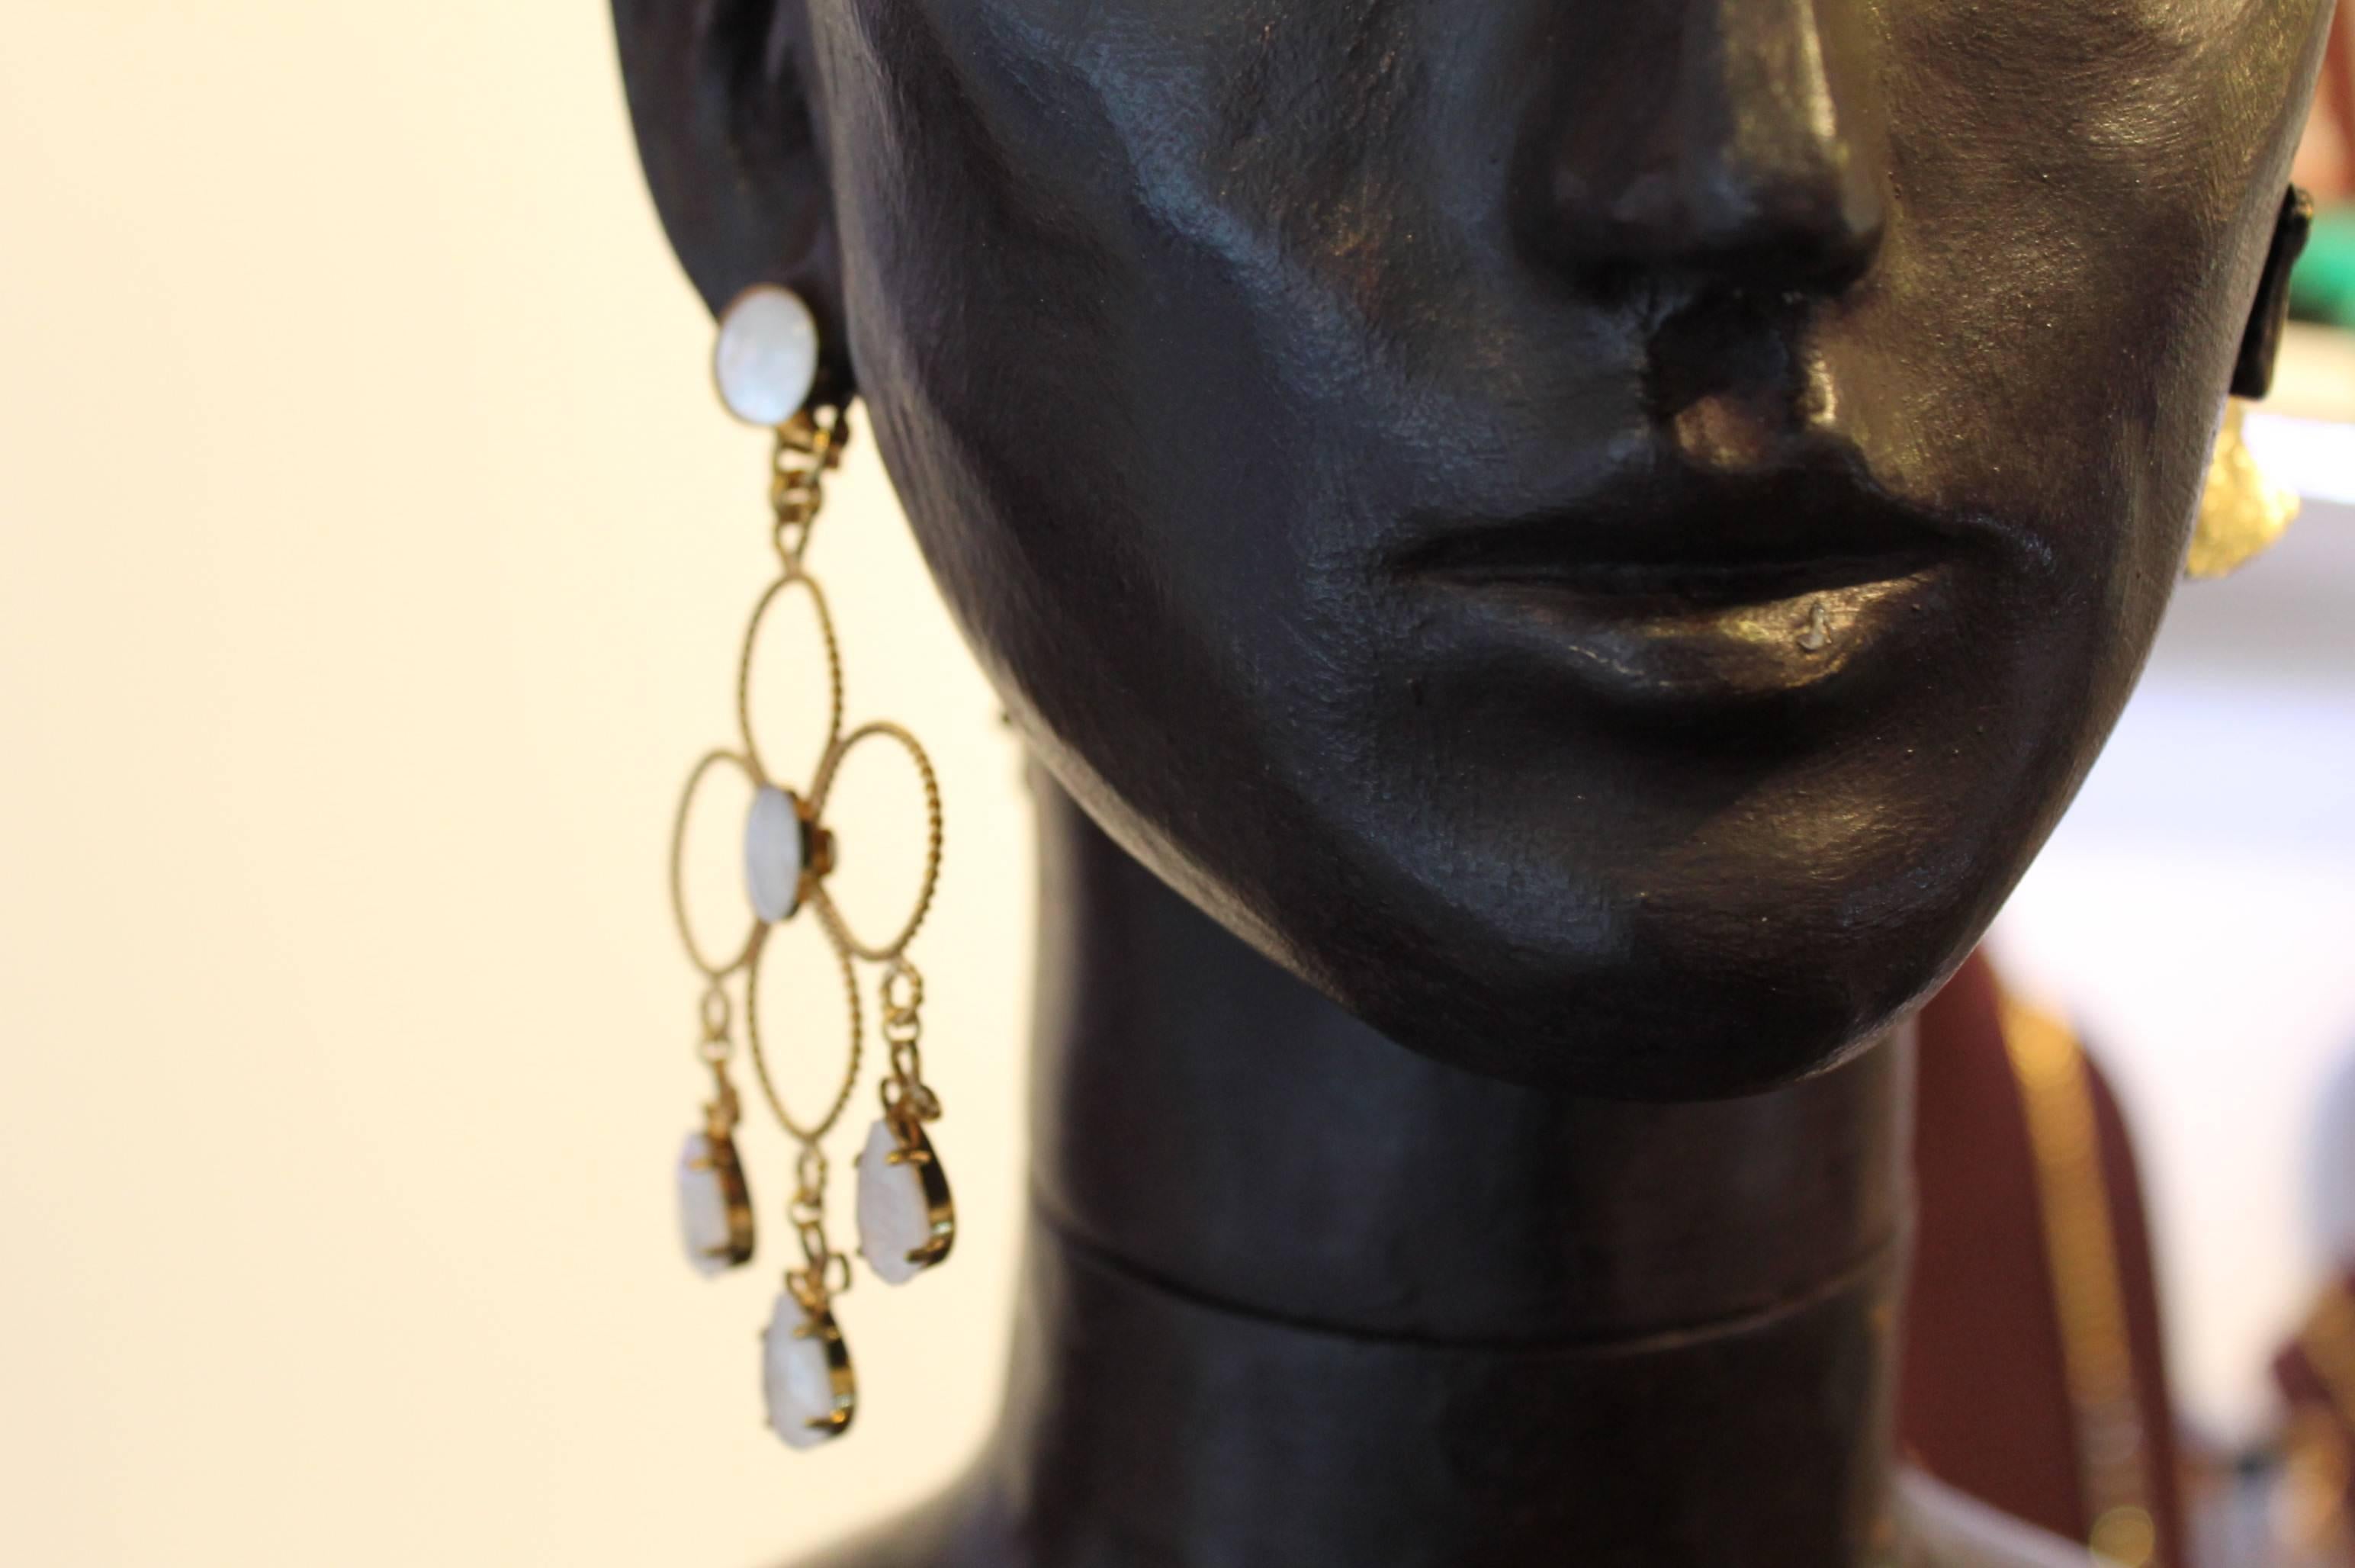 Bold yet delicate.

Floral outline geometric shape in twisted 23ct gold-plated wire, highlighted with mother-of-pearl and  opaque white Swarovski crystals.

Please note these earrings are clips.

Handmade for the past 25 years by Vicki’s small team